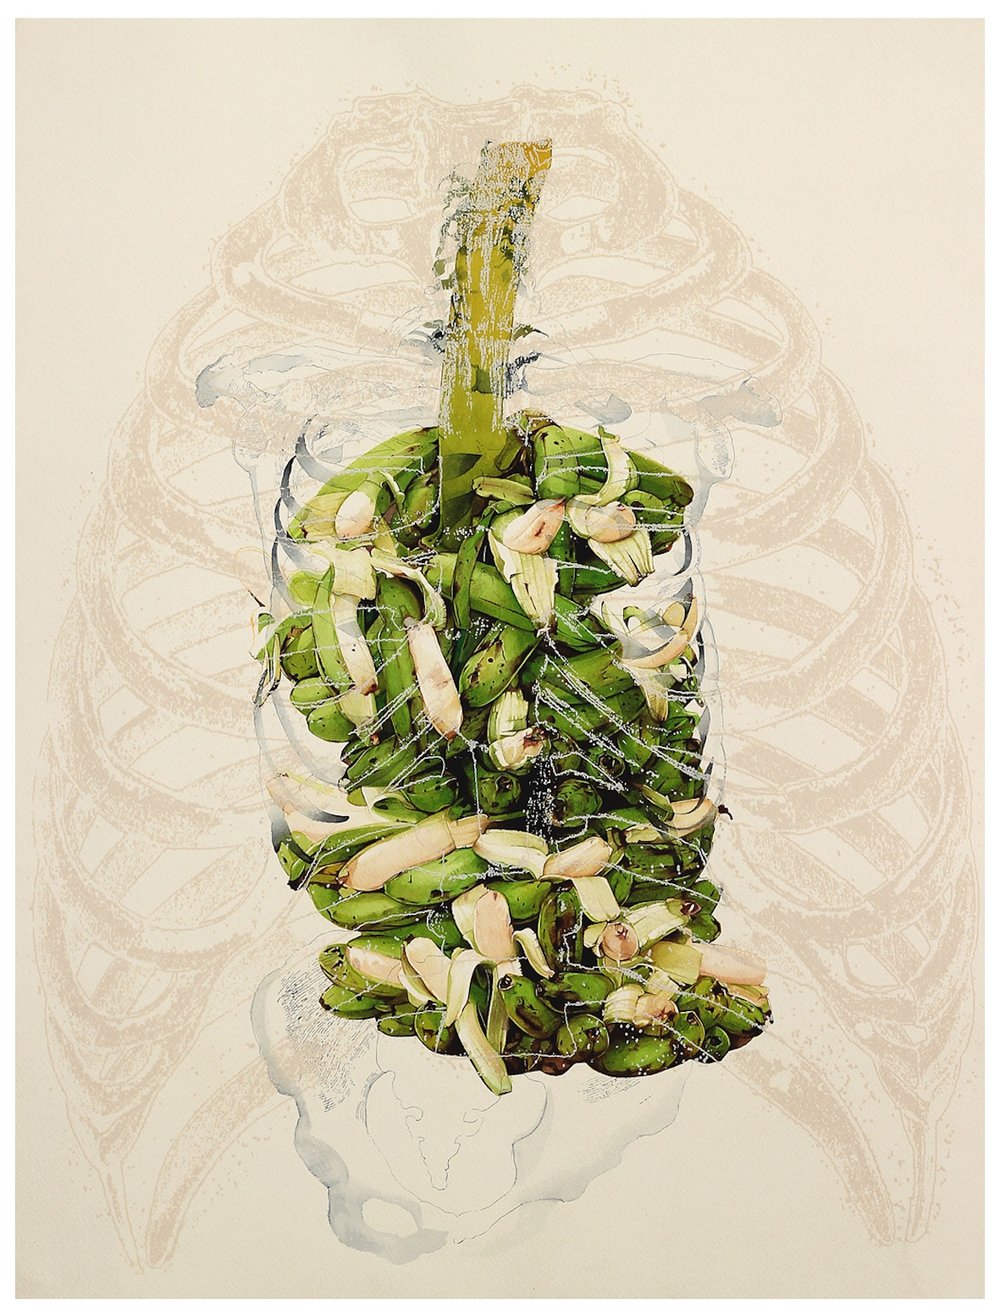  V. Ramesh, ‘Body/Offering’, 2014, watercolour and gouache on paper, 24 x 18 in. Image courtesy Gallery Threshold. 